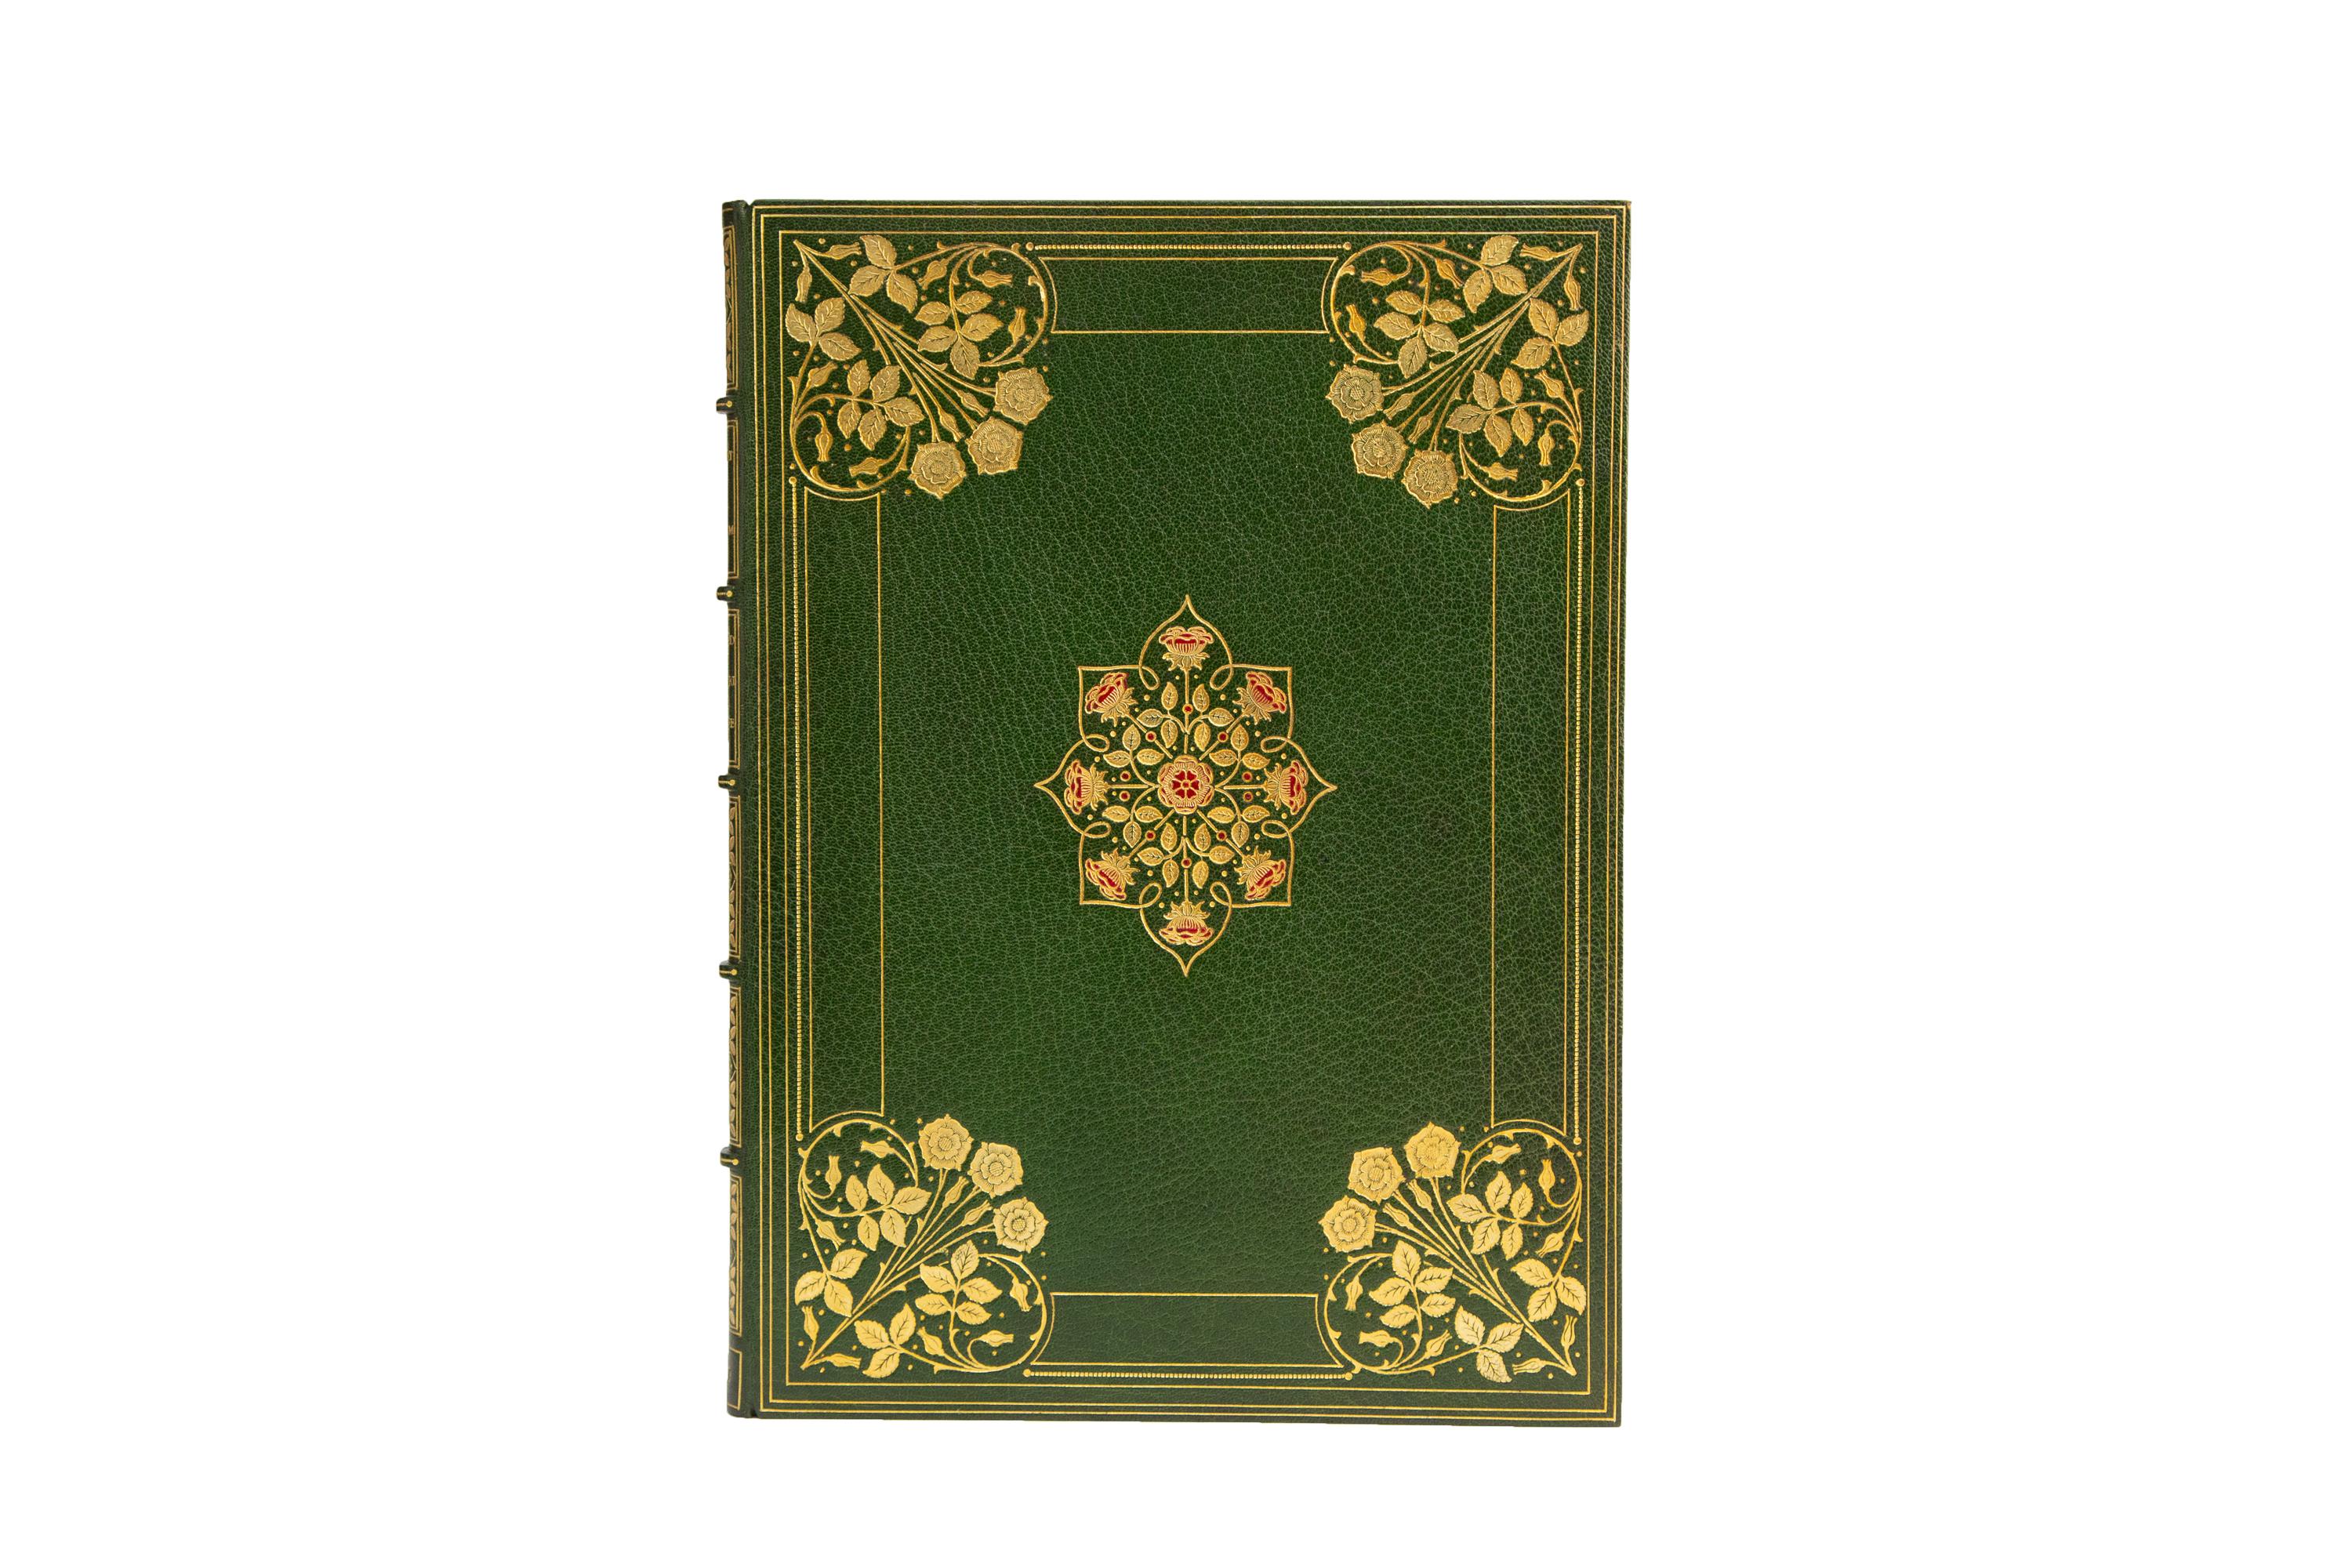 1 Volume. Edward Fitzgerald, Rubaiyat of Omar Khayyam. Bound, reproduced from a manuscript and illuminated by Sangorski & Sutcliffe. Bound in full green morocco with the cover displaying ornate floral corner detailing and a ruled gilt border as well